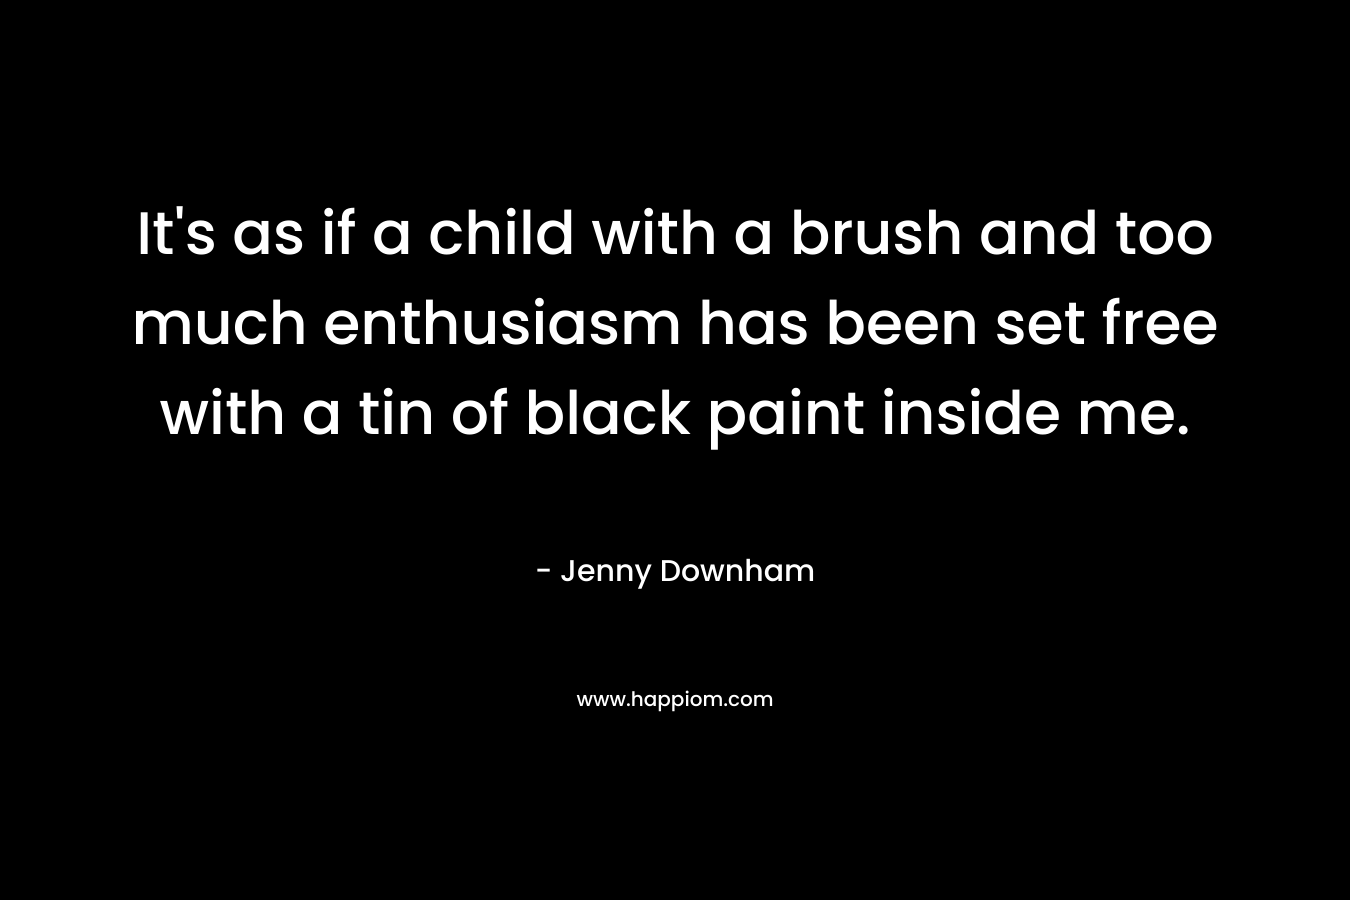 It’s as if a child with a brush and too much enthusiasm has been set free with a tin of black paint inside me. – Jenny Downham